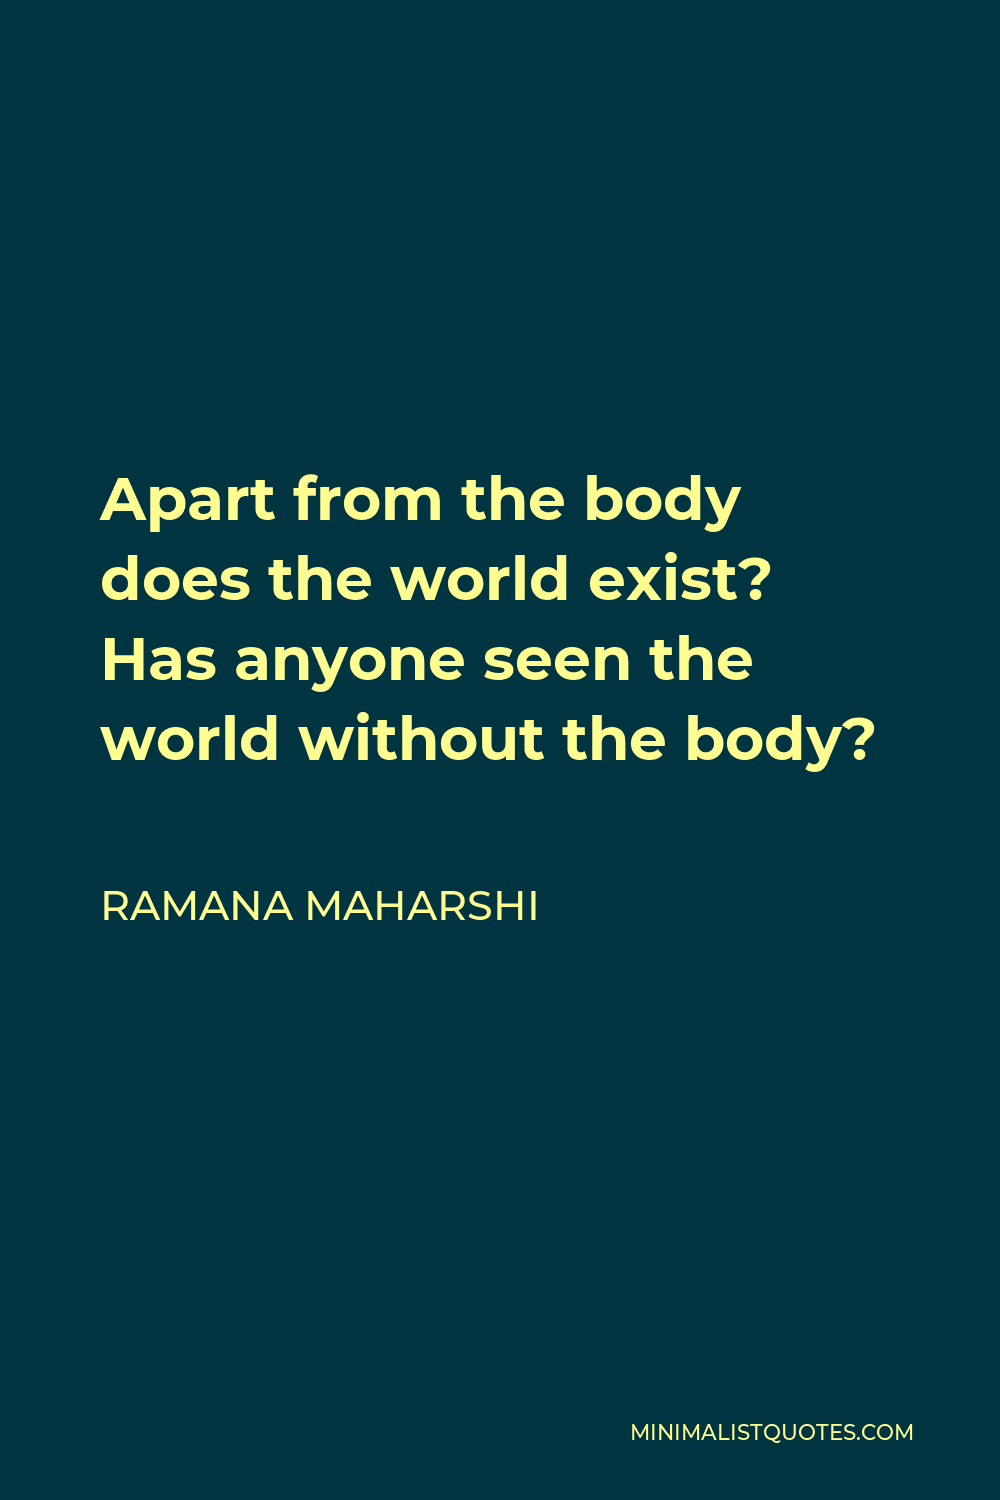 Ramana Maharshi Quote - Apart from the body does the world exist? Has anyone seen the world without the body?